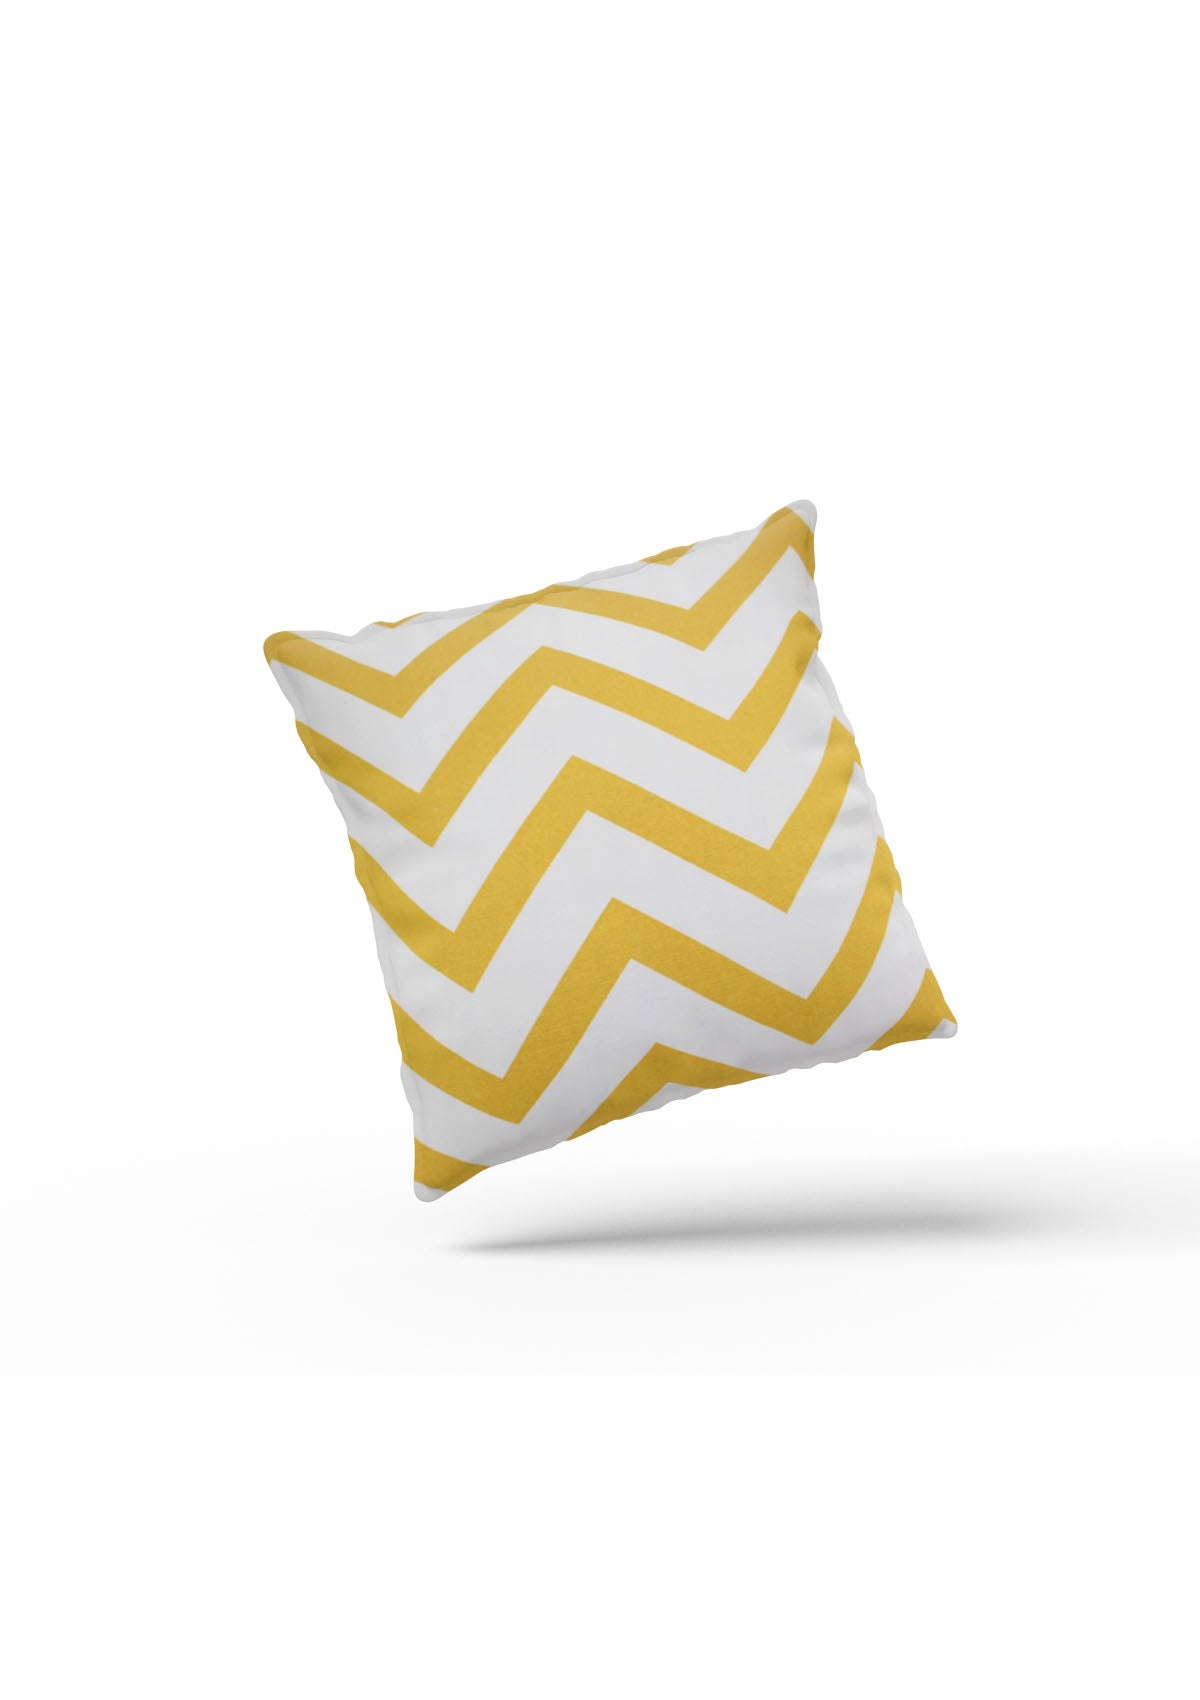 Vibrant yellow stripe cushion cover for home decor